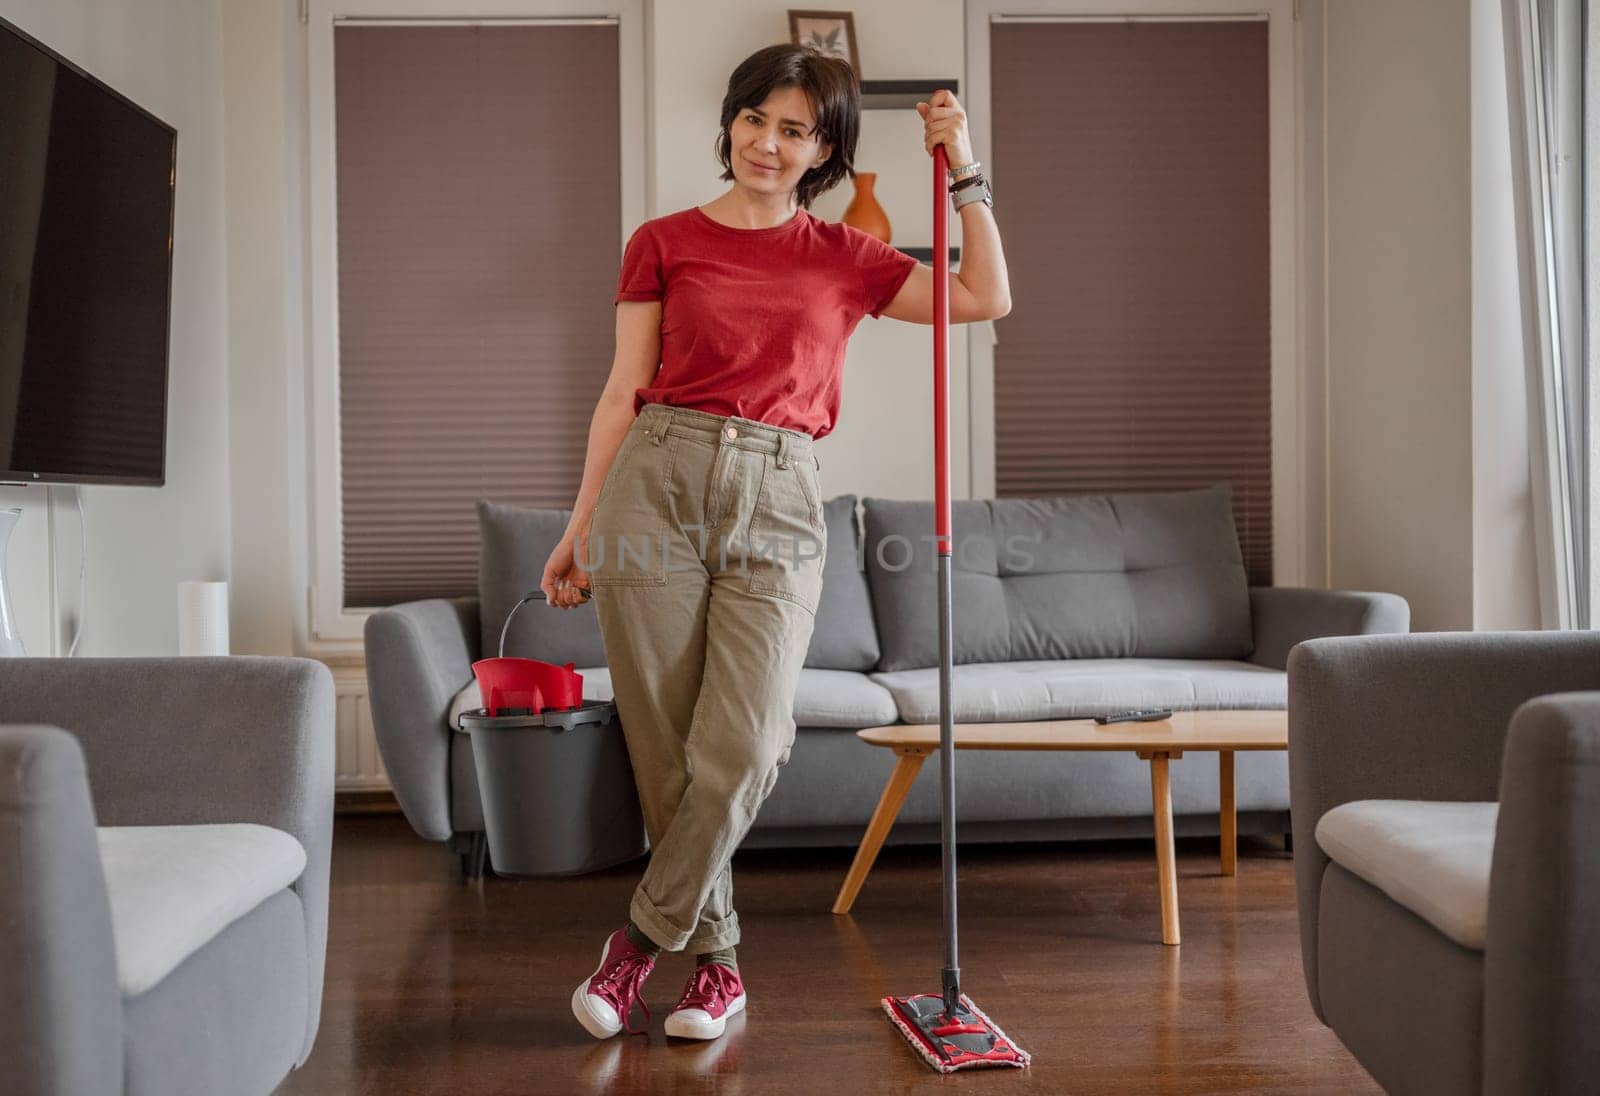 Cheerful Cleaner Stands In Room With Mop And Bucket, Washing Floor